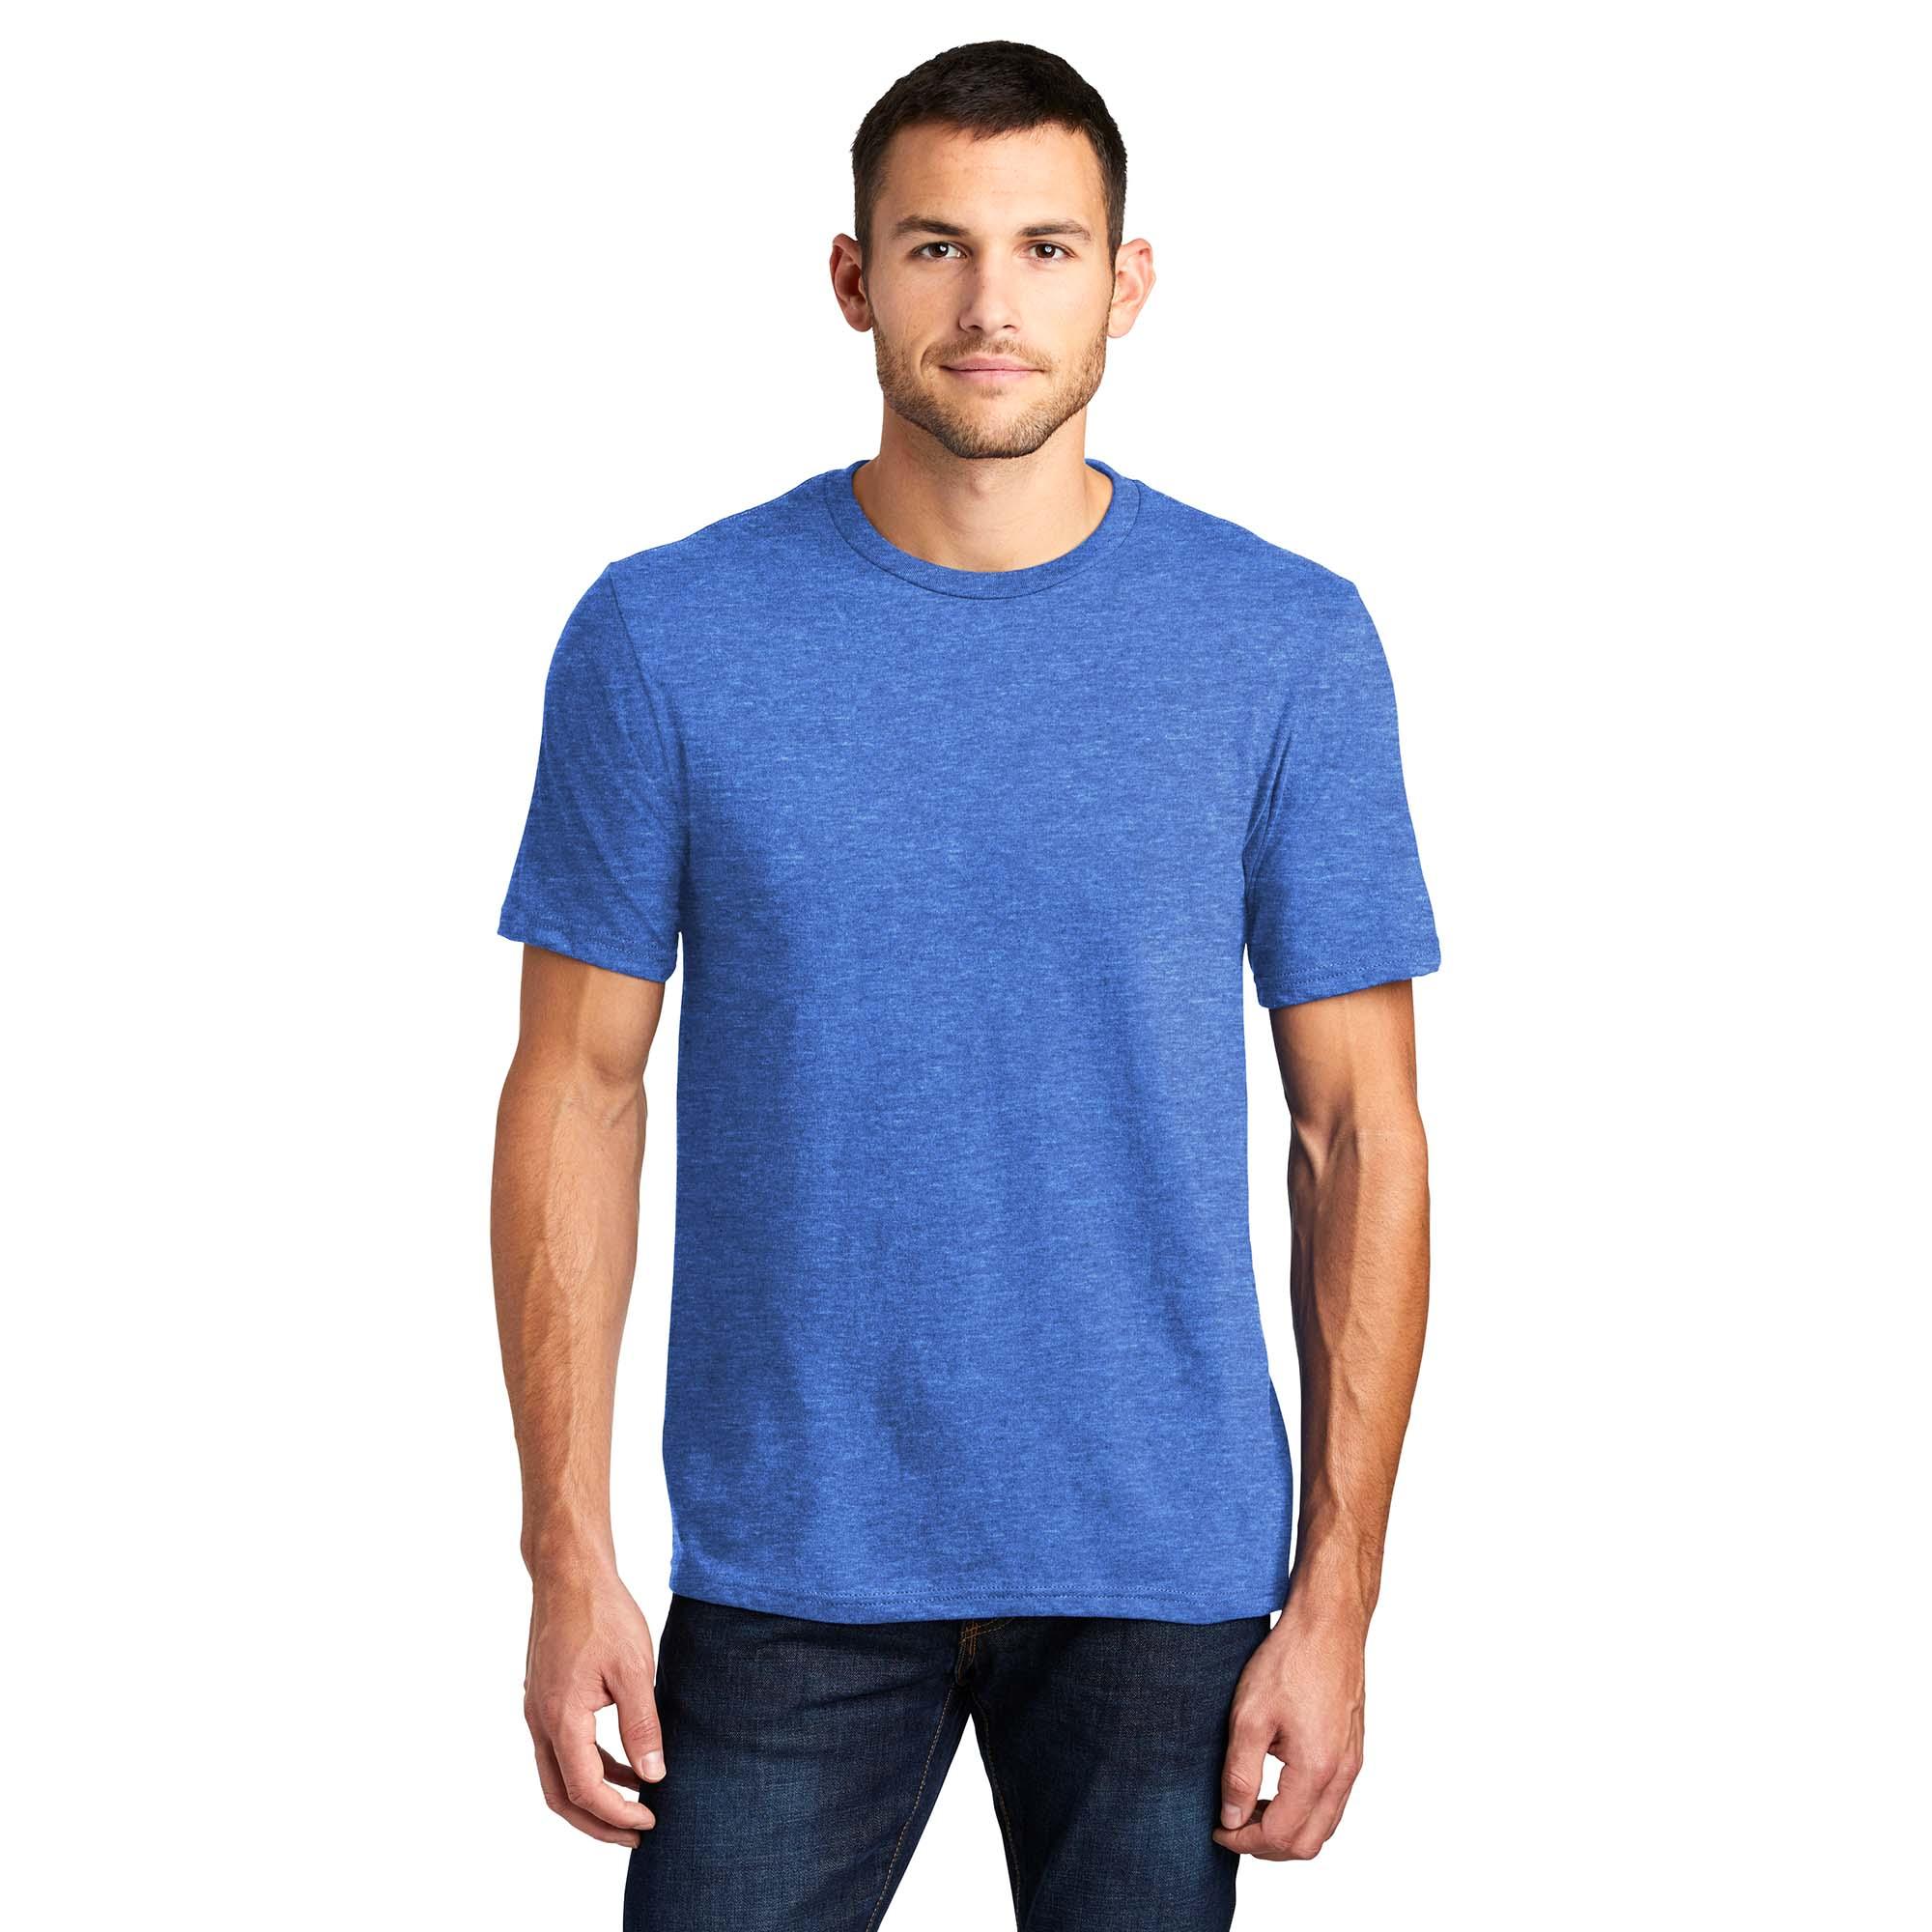 District DT6000 Very Important Tee - Heathered Royal | FullSource.com